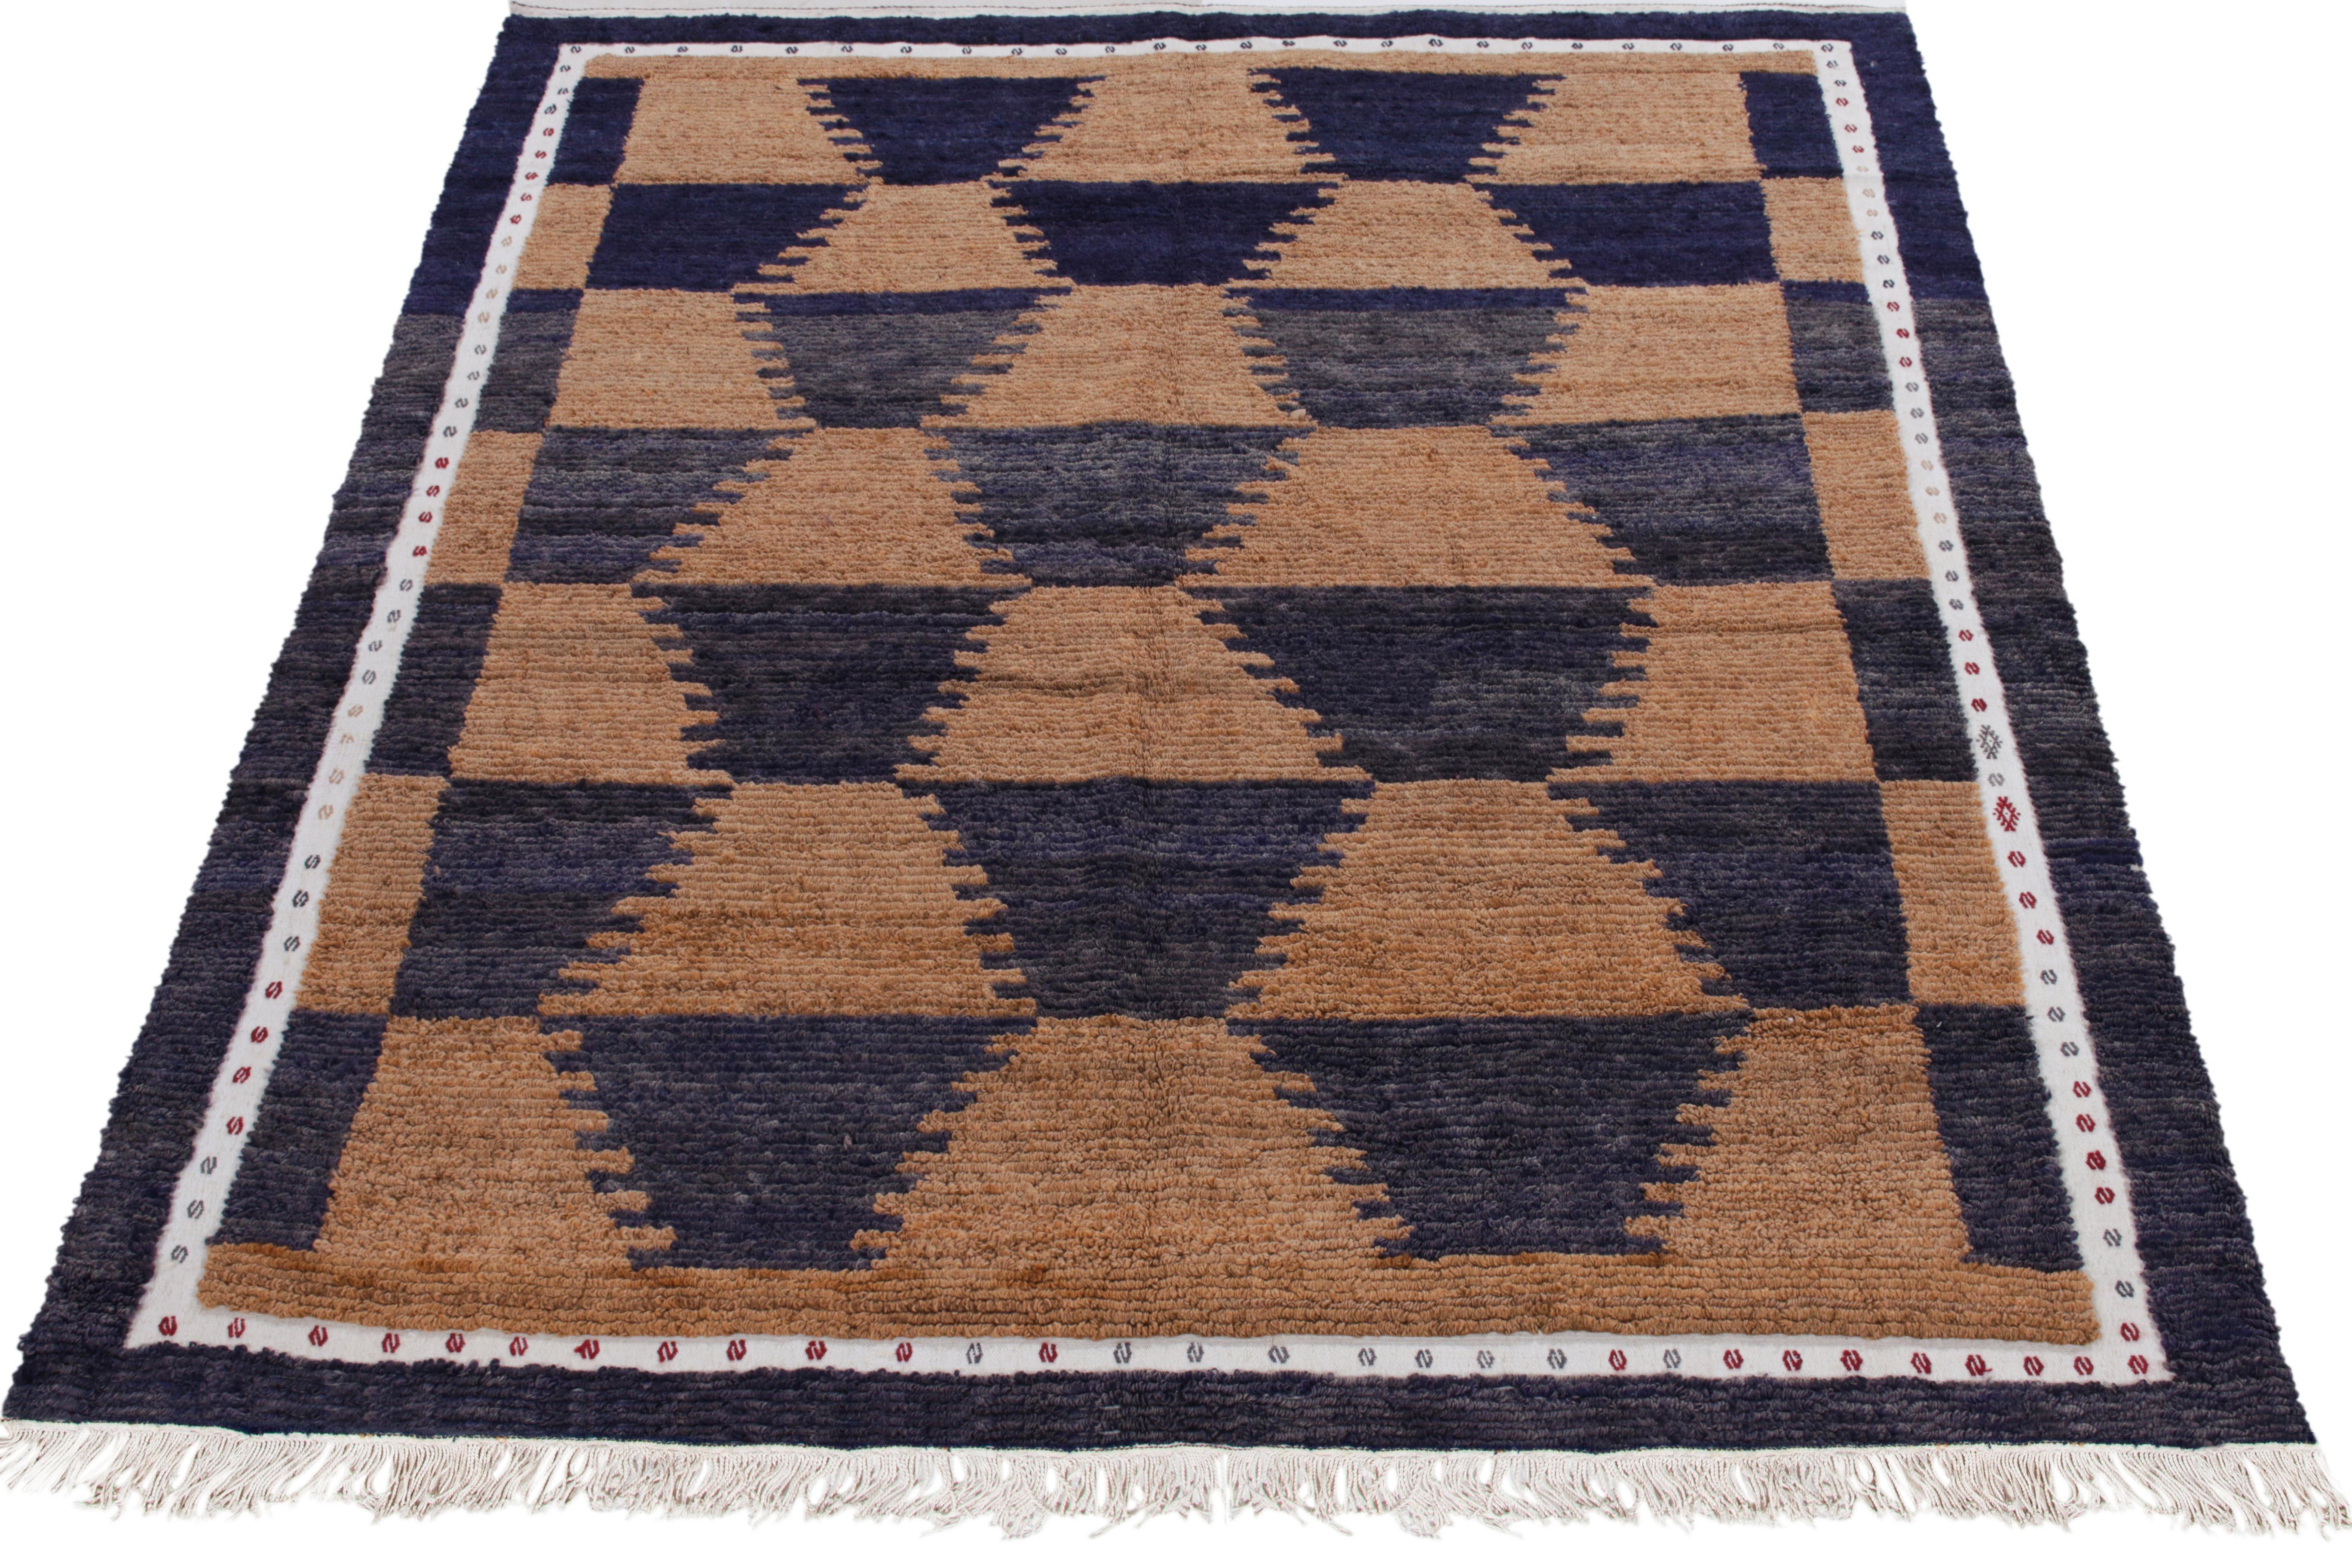 A specimen of artistic acumen, this vintage 6x7 Tulu rug of the 1950s from our Antique & Vintage collection unveils sharp geometry in tribal designs bracing light brown & lustrous midnight blue tones. Connoisseurs may observe a delicate white border